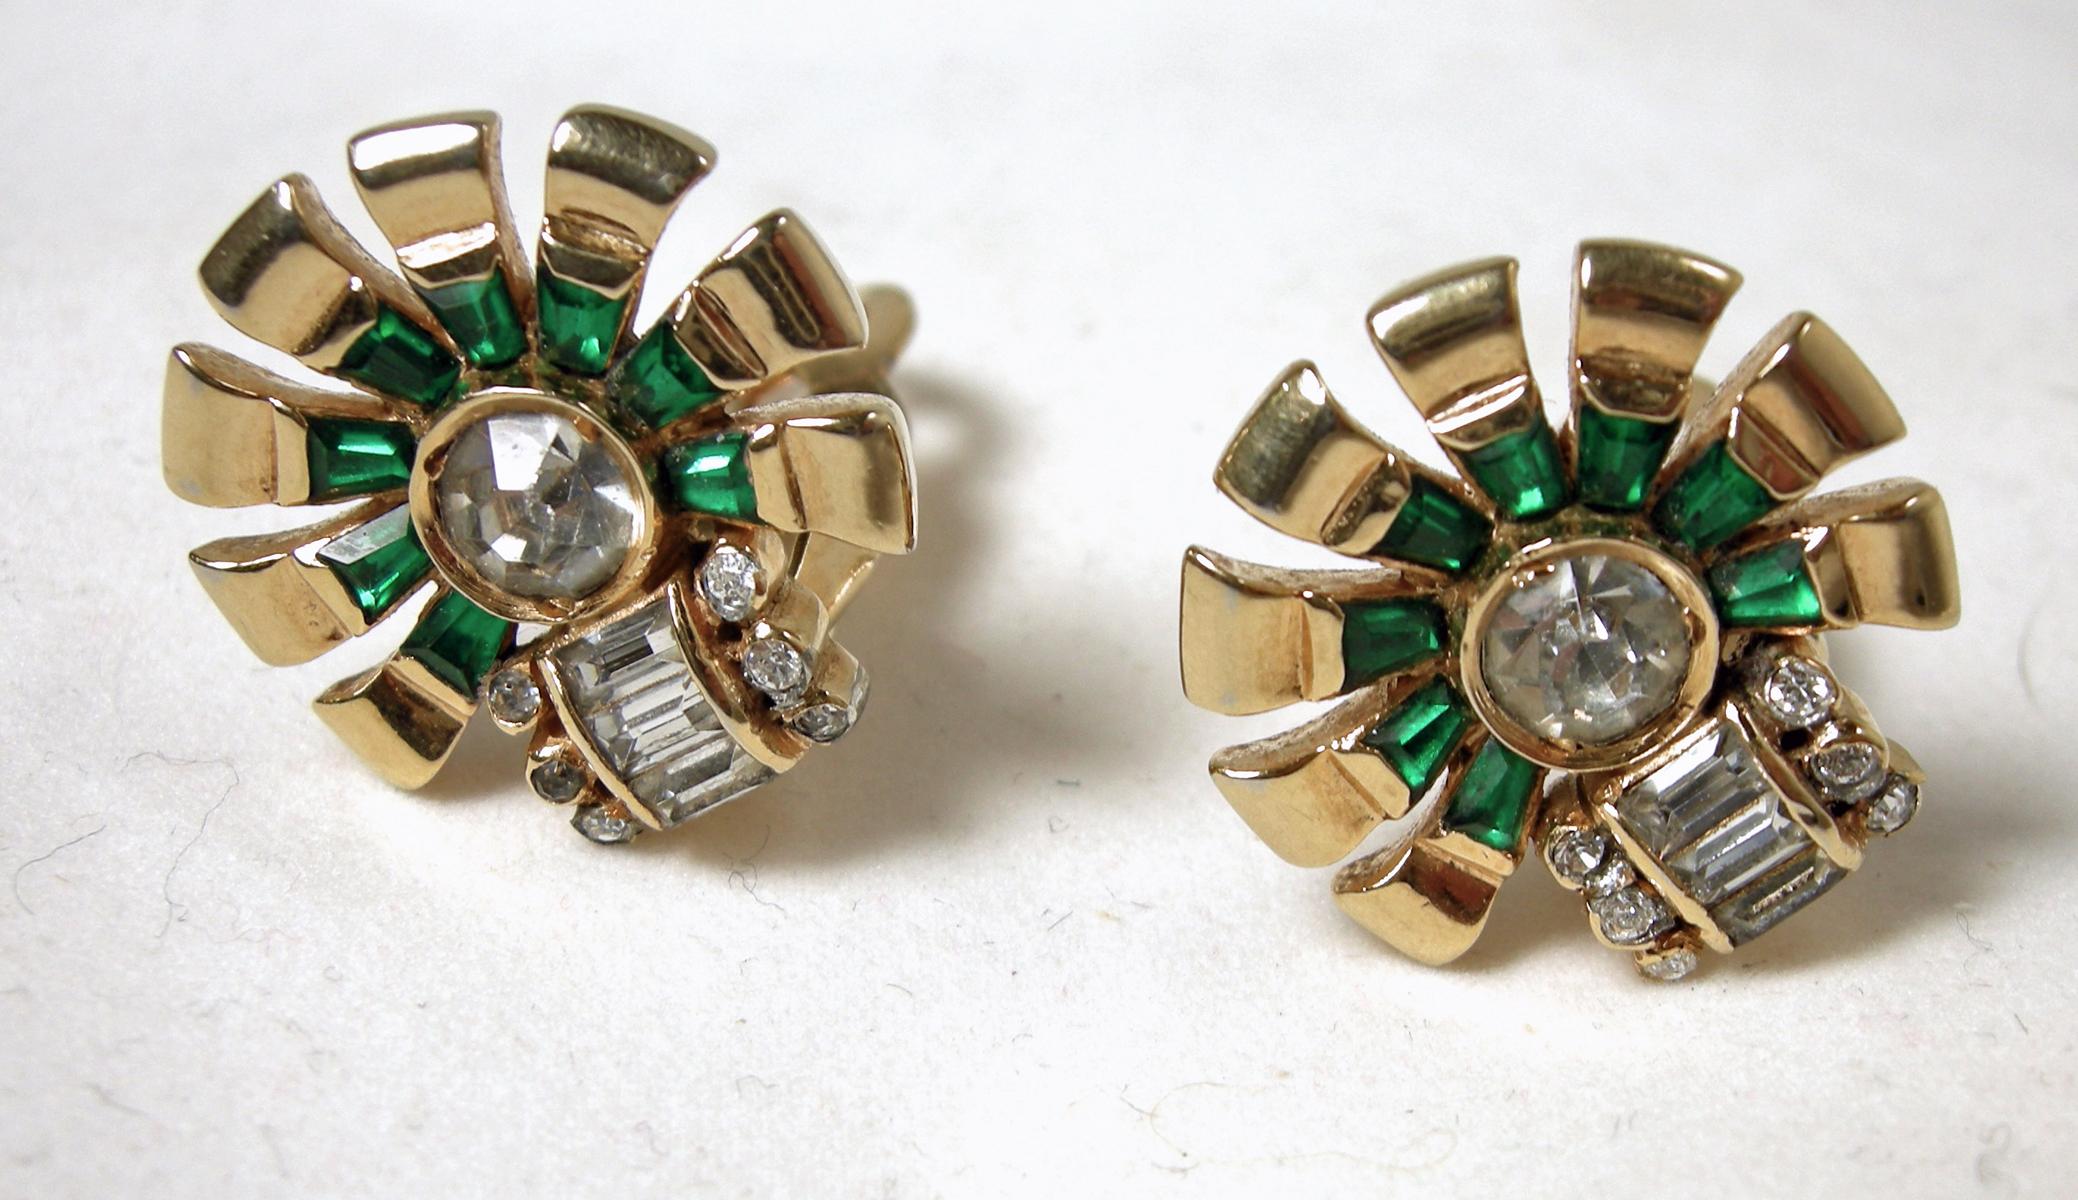 These vintage signed Mazer earrings have a retro design with green and clear crystals in a gold-tone setting.  In excellent condition, these clip earrings measure 3/4” across/diameter and are signed “Mazer”.